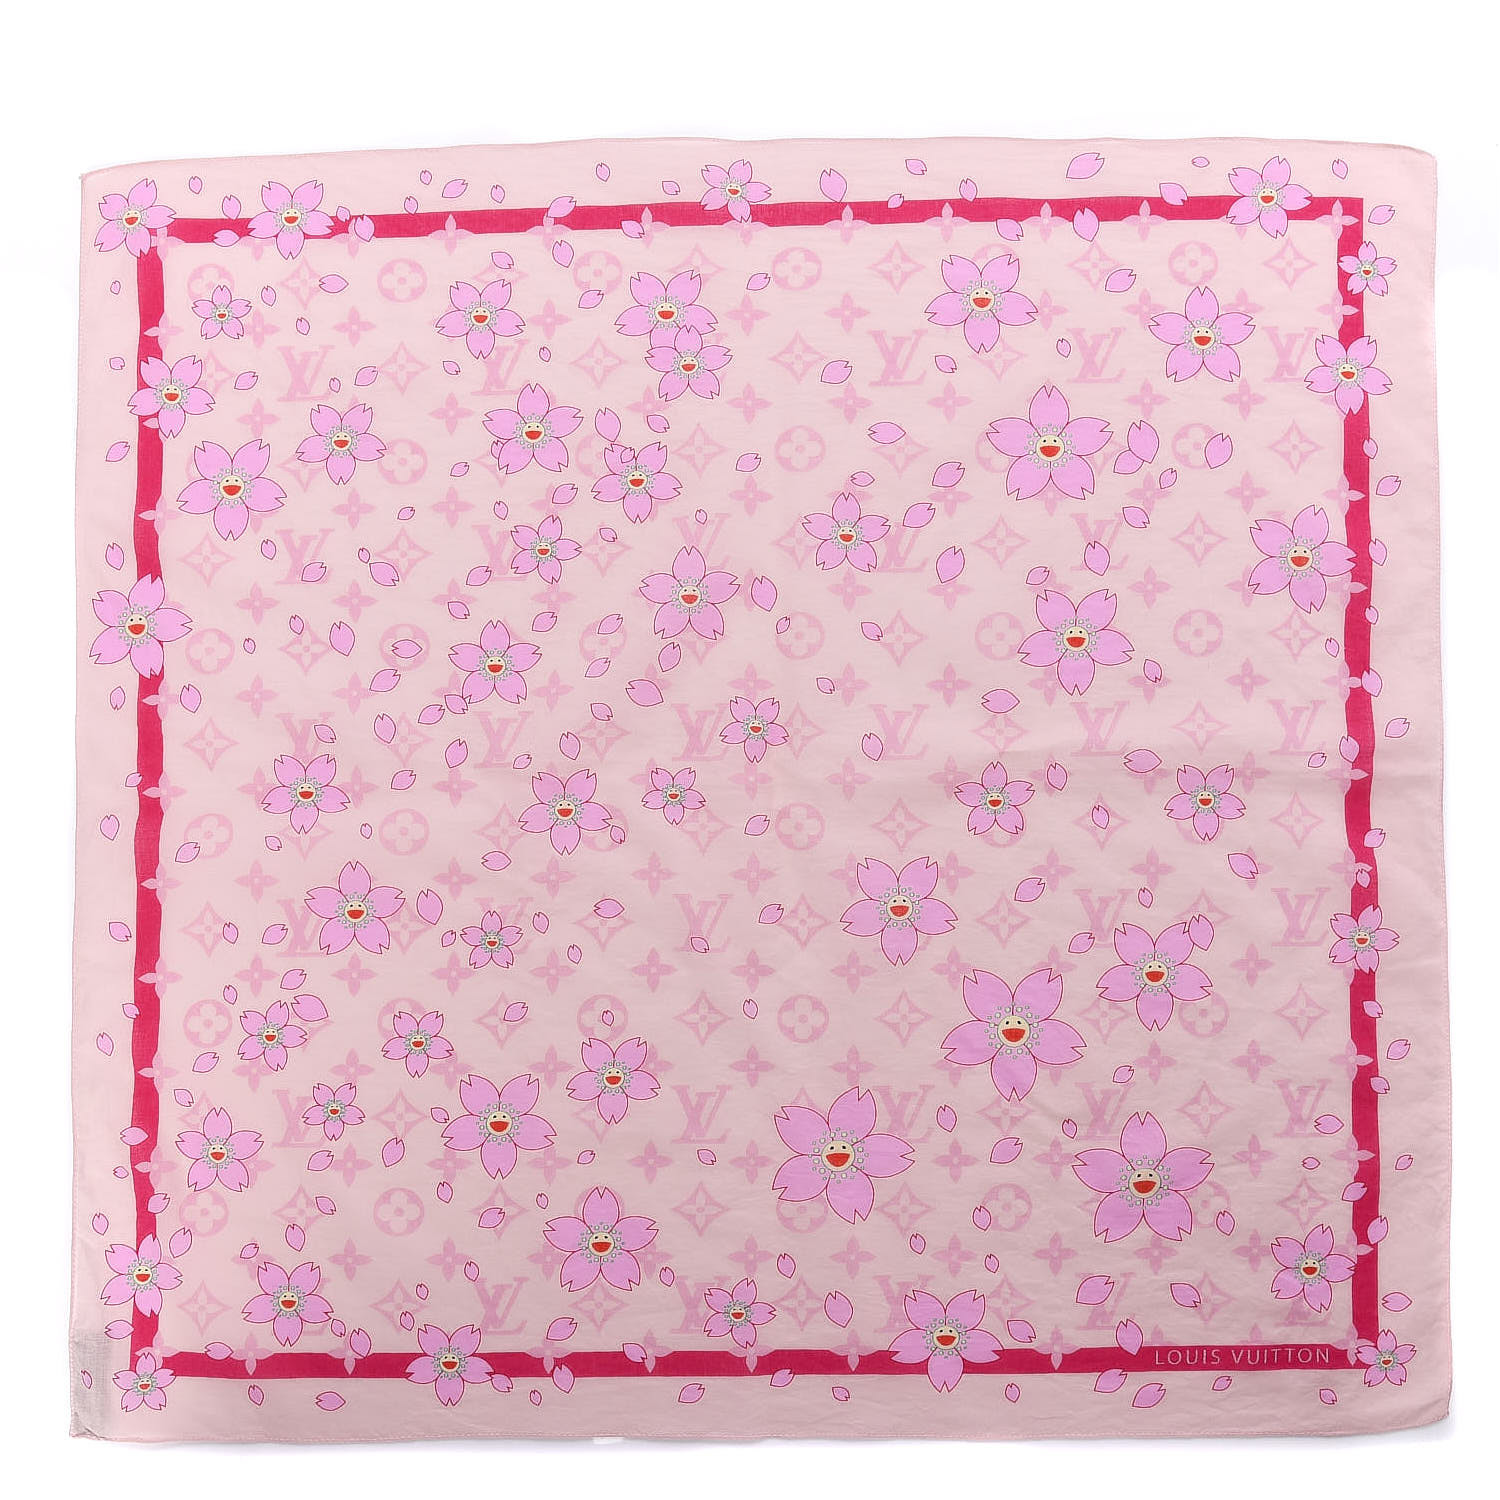 LOUIS VUITTON Cotton Cherry Blossom Square Scarf Pink 408174